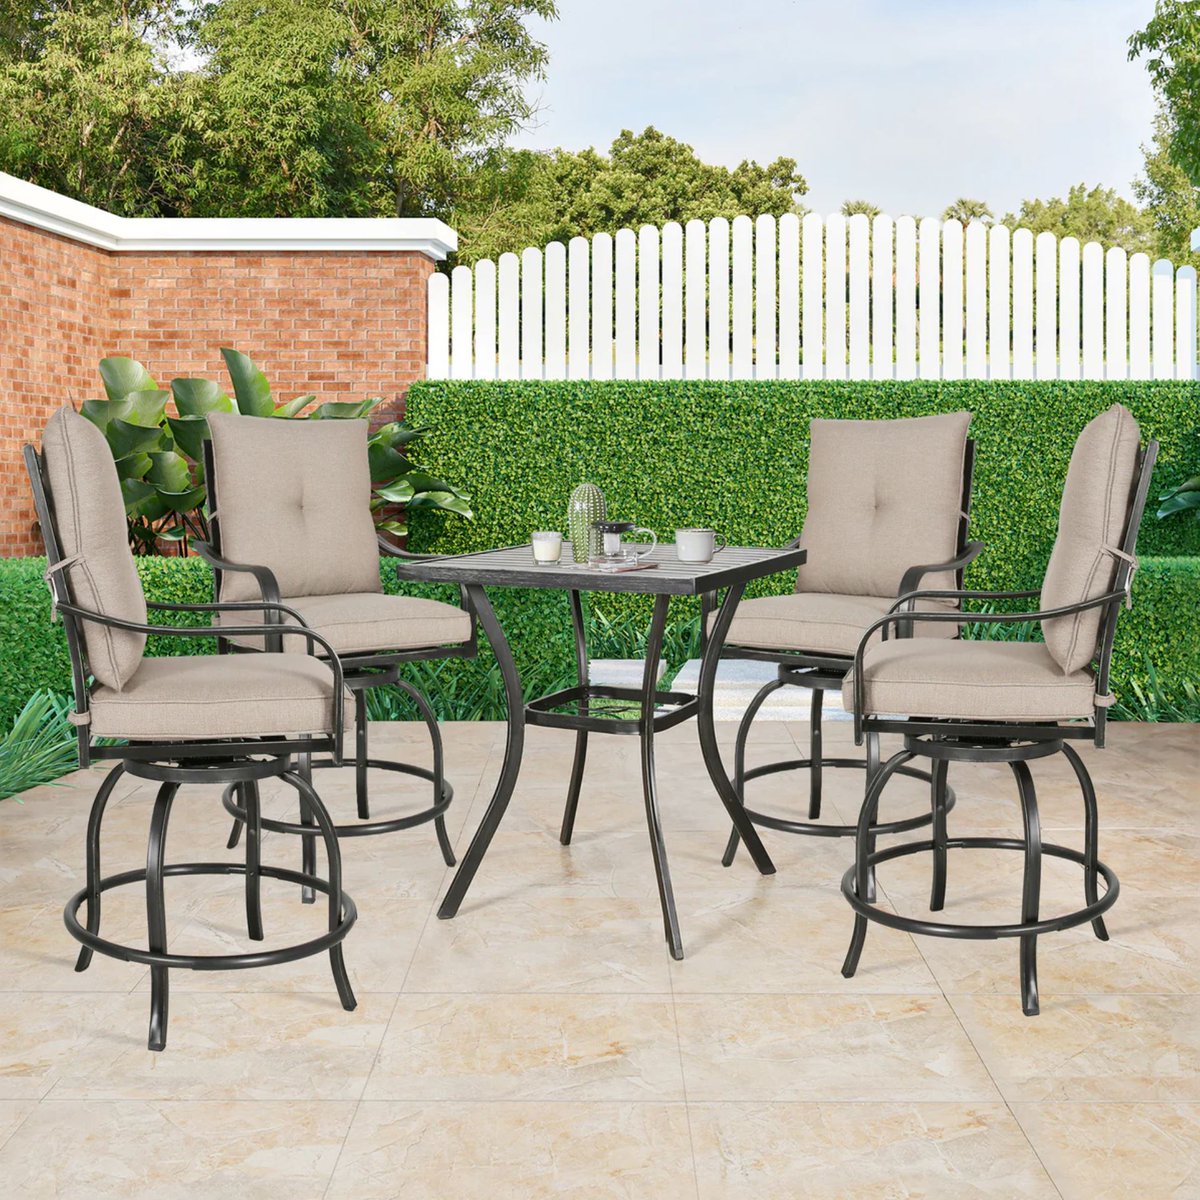 An excellent addition to your garden, backyard, porch, patio, or living room.
check us out at peakhomefurnishings.com
#chair #patio #patiodecor #furniture #interiordesign #family #hangout #DiningSet #DiningChair #squareTable #swivelchair #barstools #heightchair